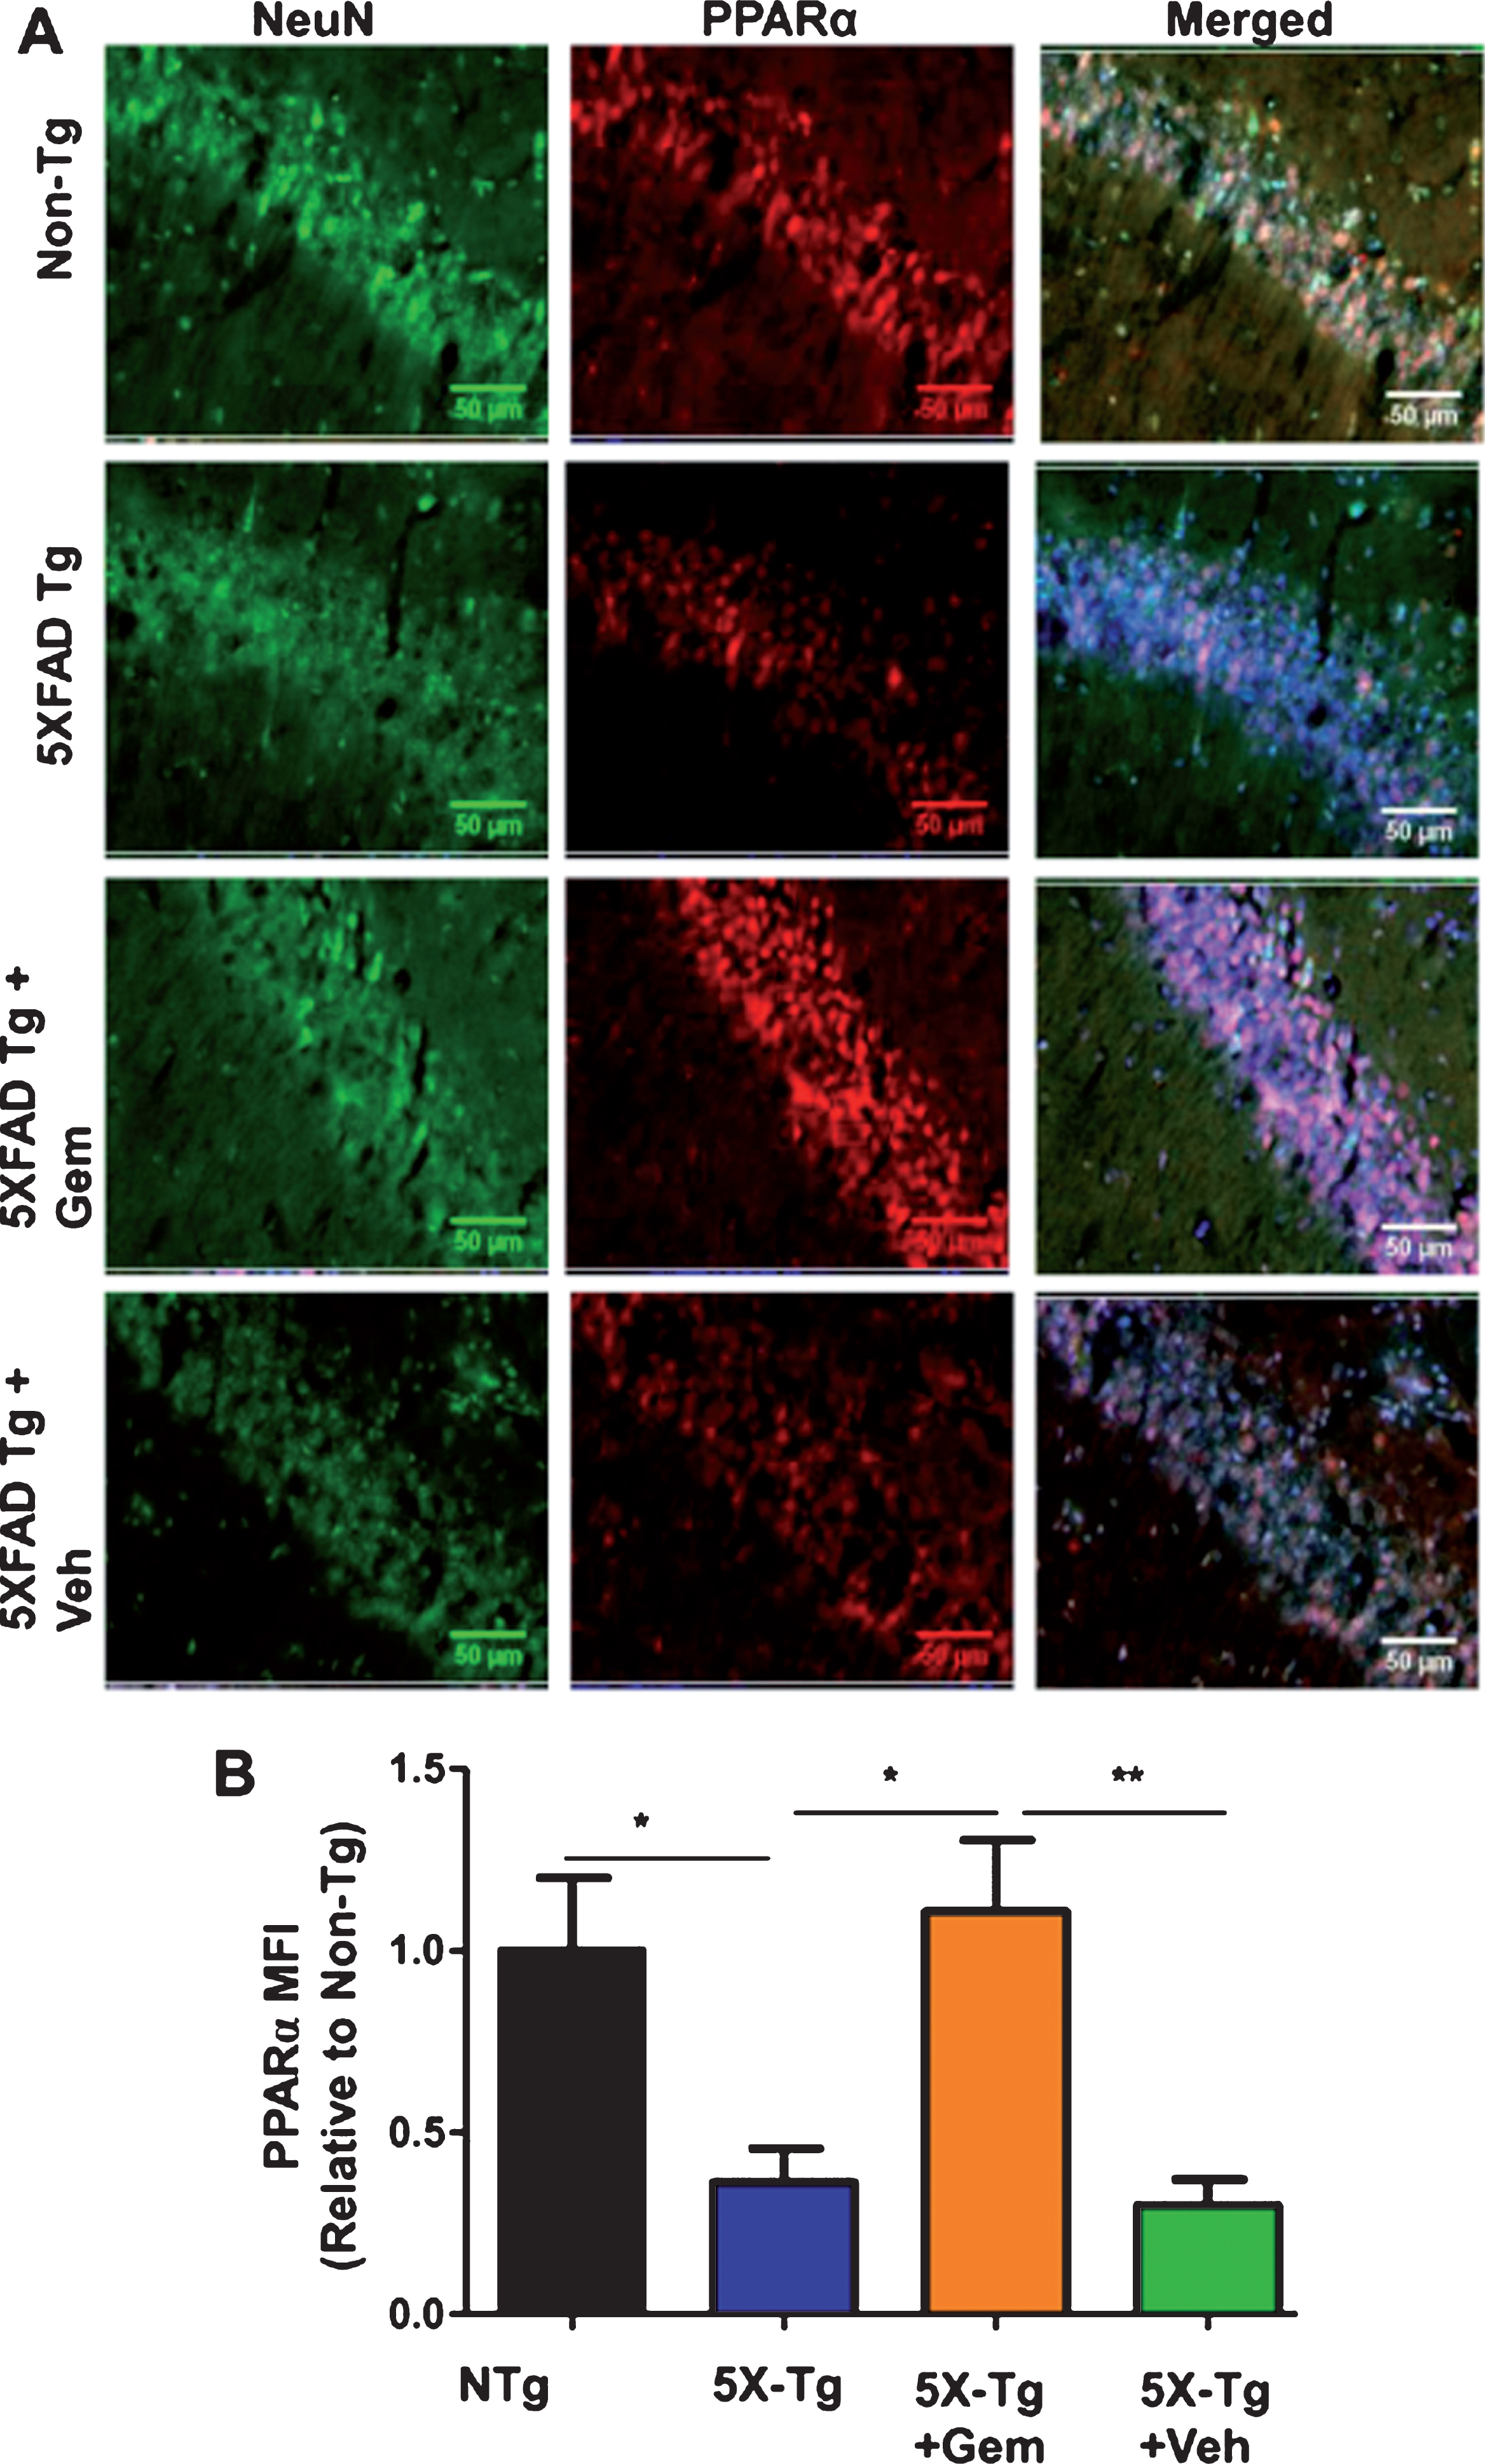 Oral gemfibrozil increases the level of PPARα in the hippocampus of 5XFAD mice. Six month old 5XFAD mice (n = 6) were treated with gemfibrozil (7.5 mg/kg/day) or vehicle (0.1% methylcellulose) for 1 month followed by double-labeling of hippocampal sections for NeuN and PPARα (A). Scale bar = 50μm. Mean fluorescence intensity (MFI) of PPARα (B) was calculated from two sections (one image/section) of each of six mice per group. All data are represented as fold change (mean±SEM) with respect to the non-transgenic. One way ANOVA followed by Tukey’s multiple comparison test was used for statistical analysis;  *p <  0.05,  **p <  0.01.